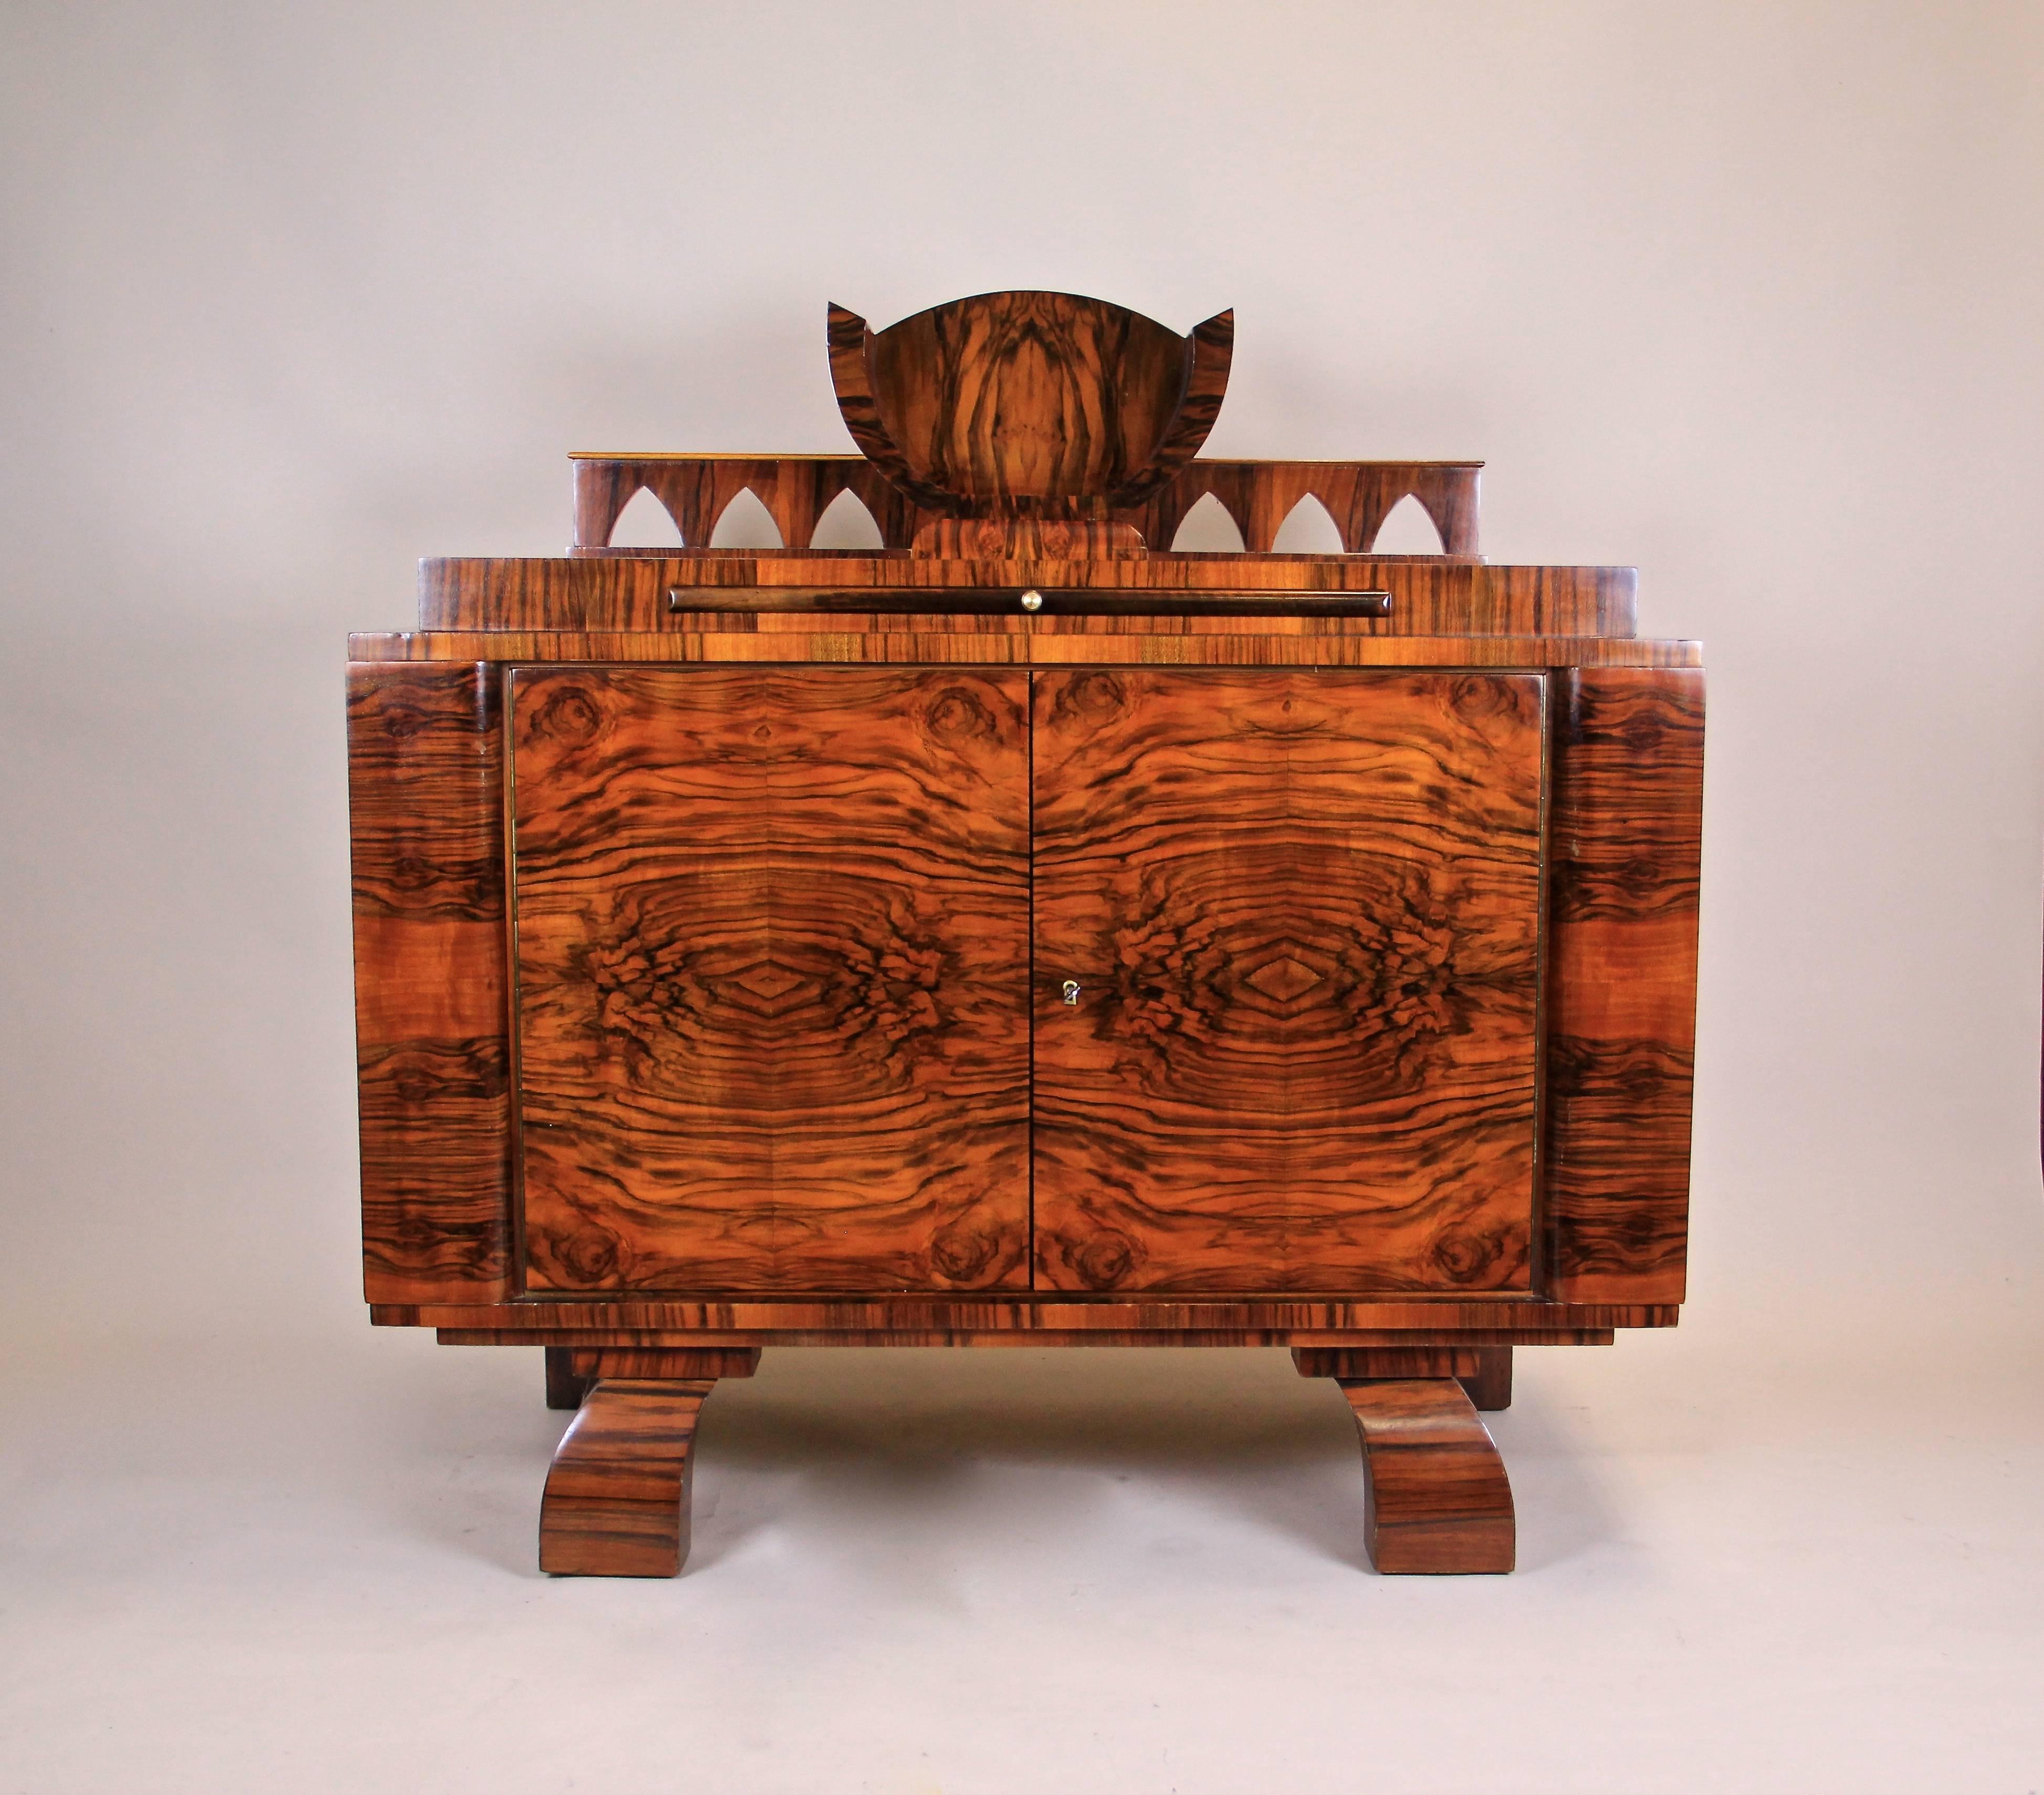 Outstanding Art Deco commode or sideboard from the period in Austria circa 1925. Veneered with finest burr walnut this commode impresses with an exceptional grain. The mirror matched veneer was set in perfection to enhance the unique shape. A